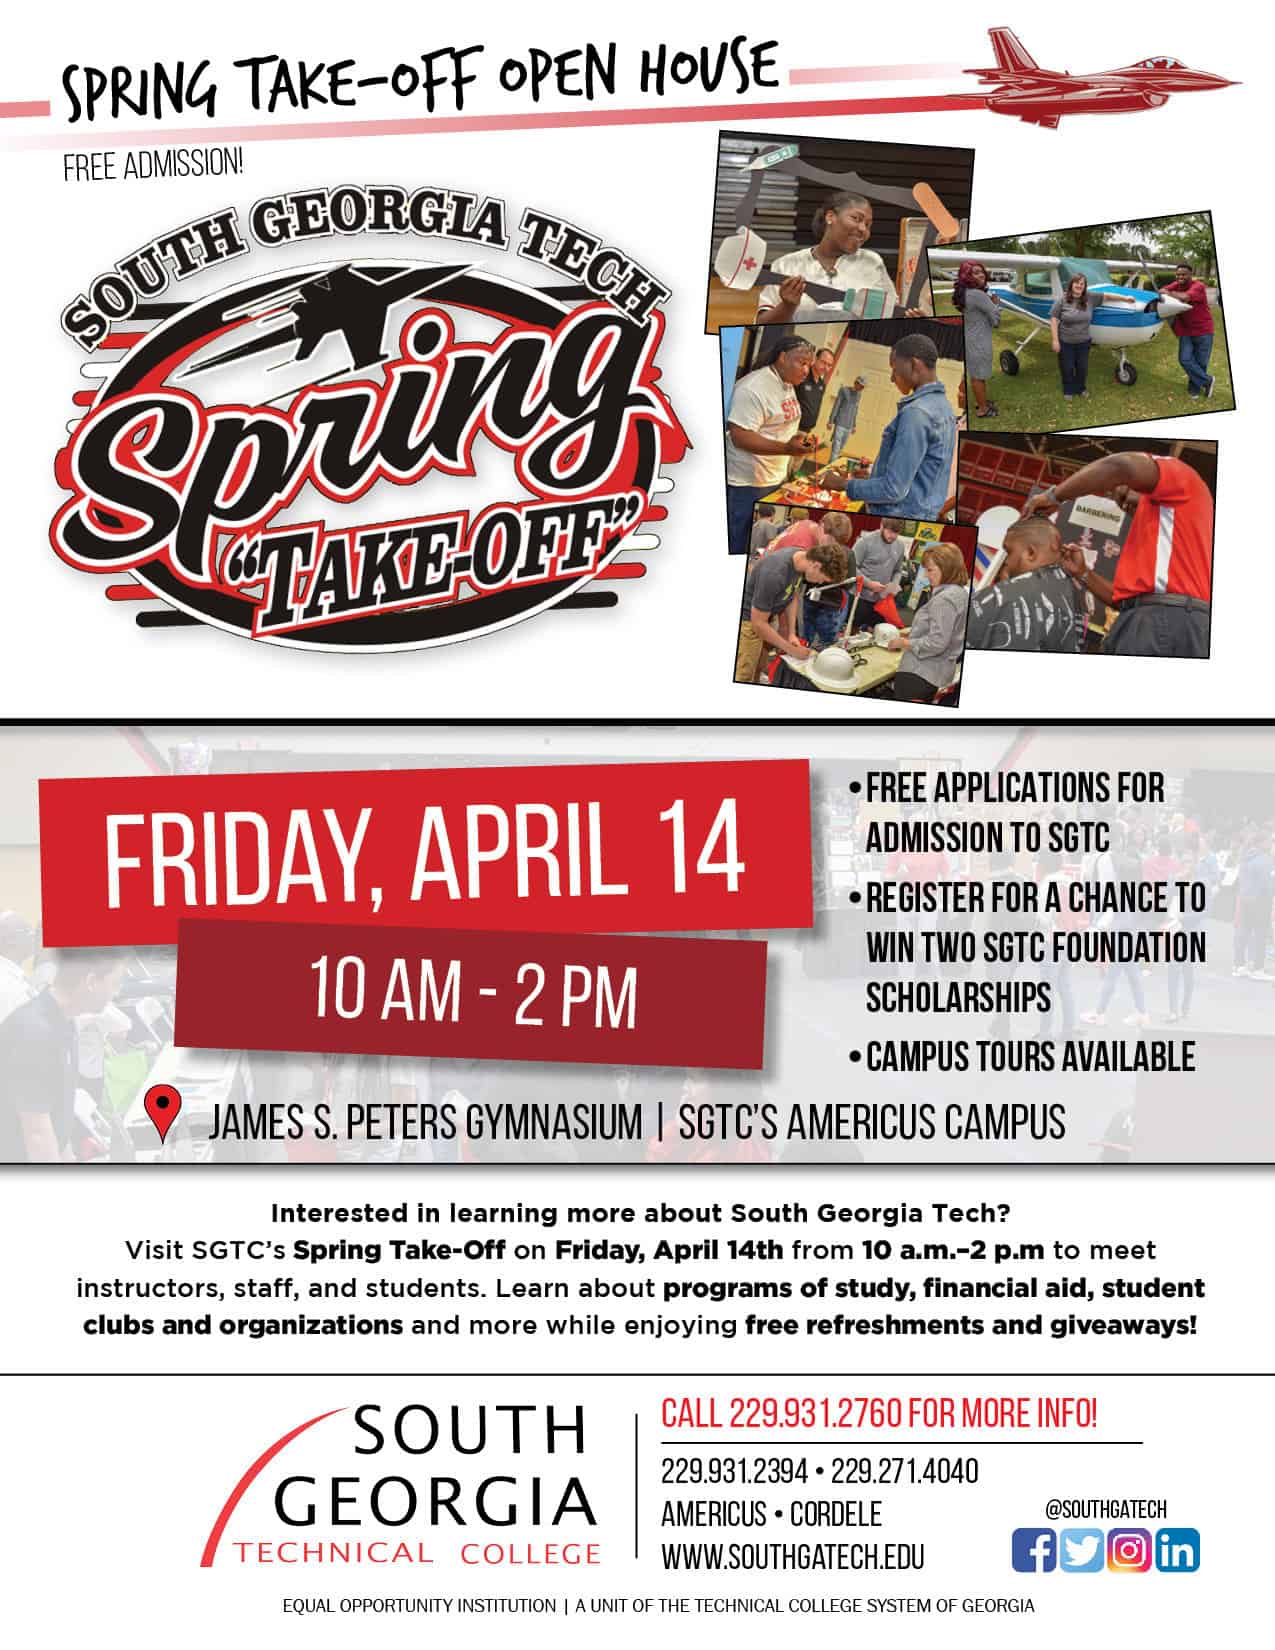 Come out and participate in the SGTC Spring Take-Off and Open House Event, Friday, April 14 from 10 a.m. until 2 p.m.